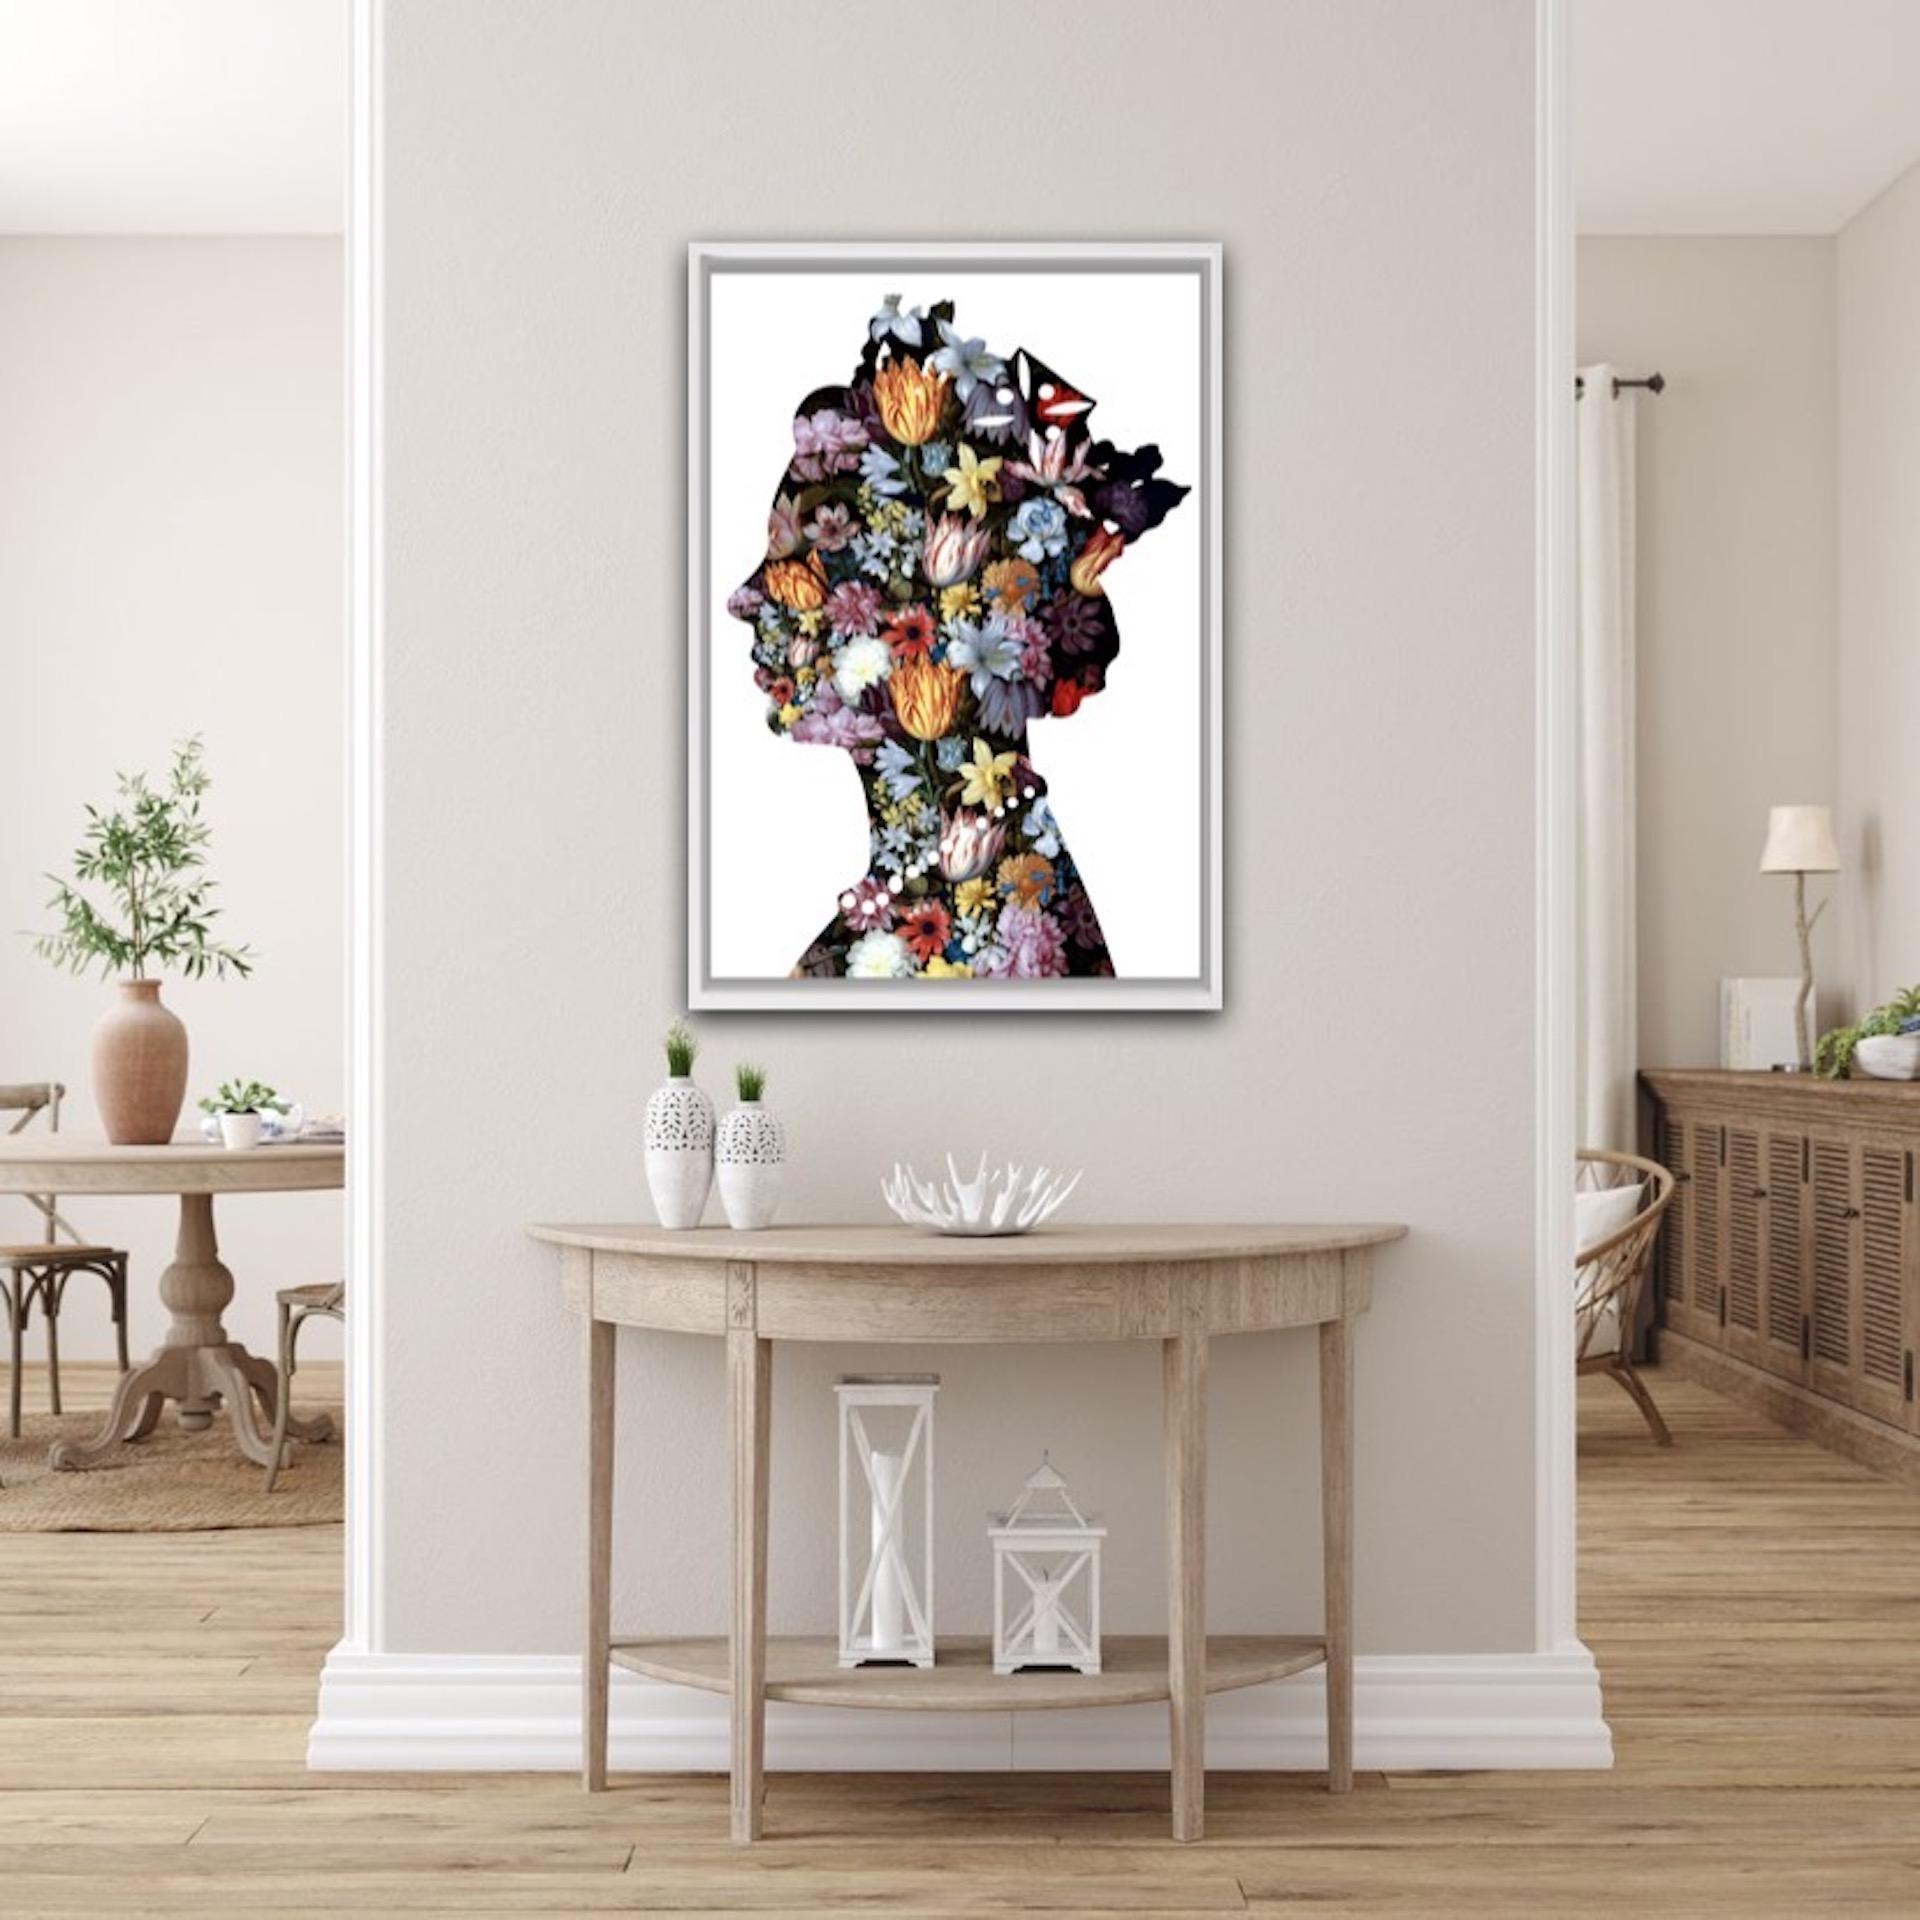 agent X, One Queen (6)White, Floral Art, Art of the Queen, Art contemporain - Contemporain Print par Agent X